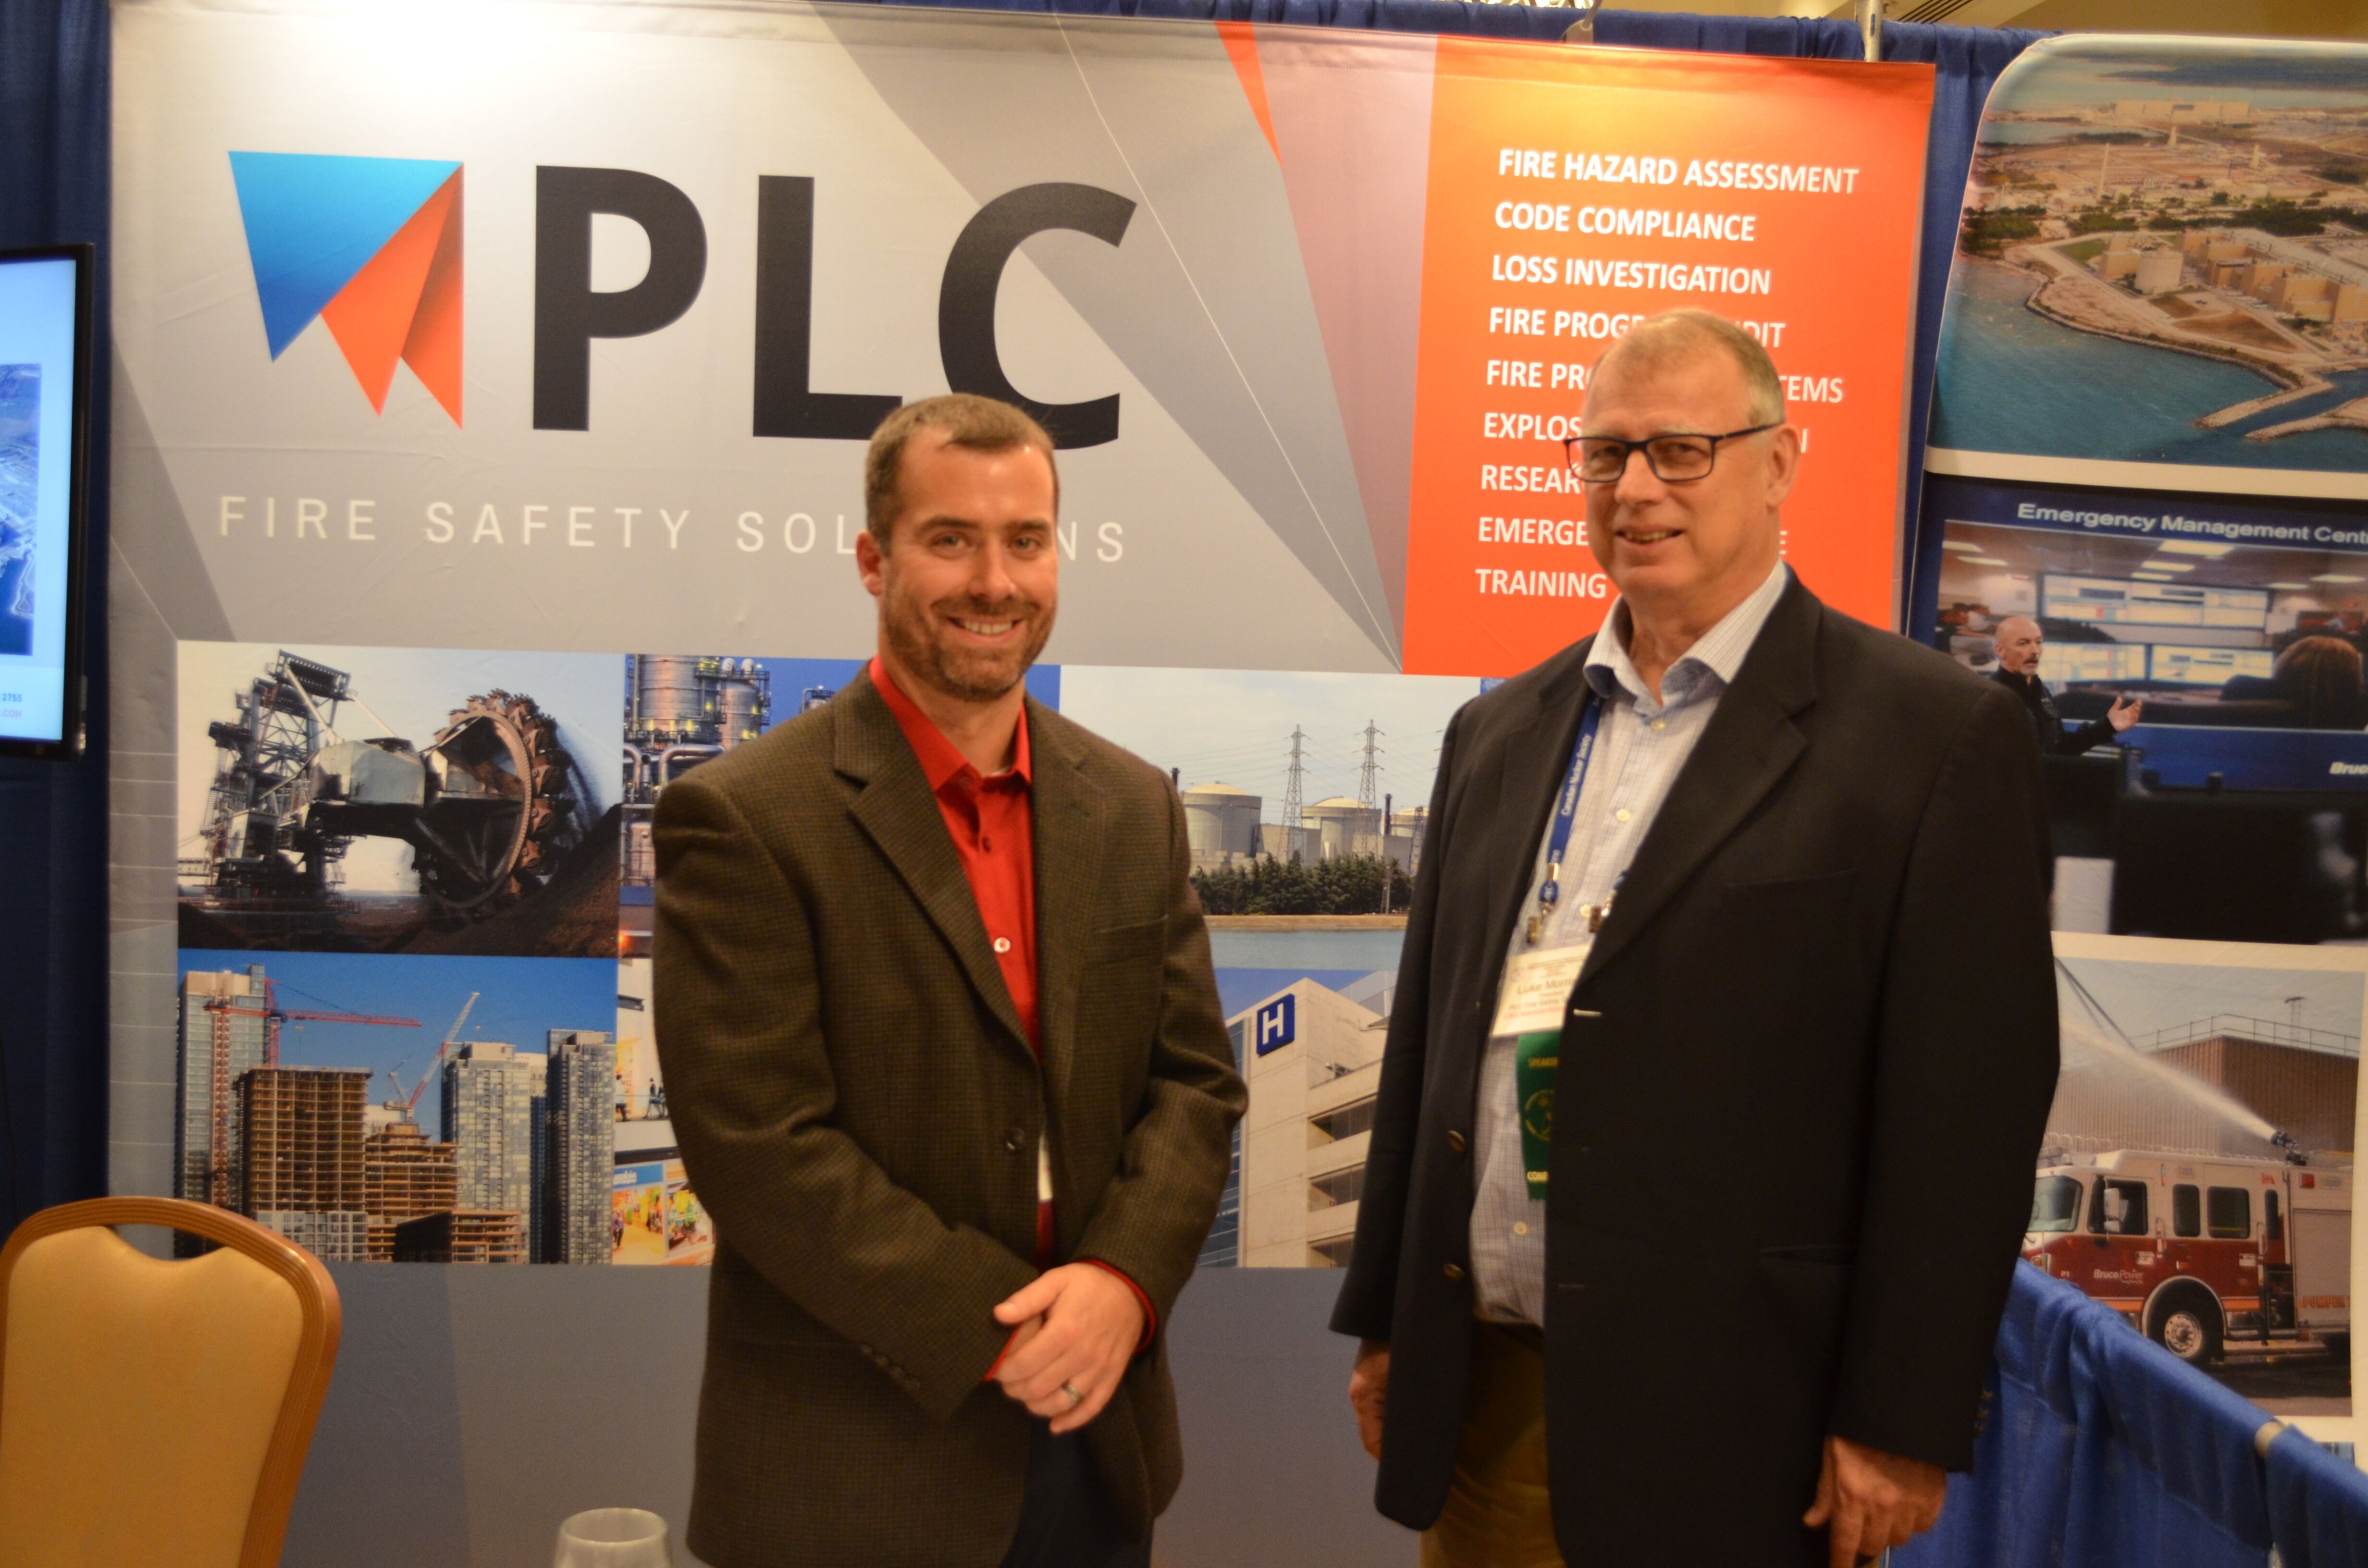 PLC Exhibitor Booth  at FSEP Sept 2017